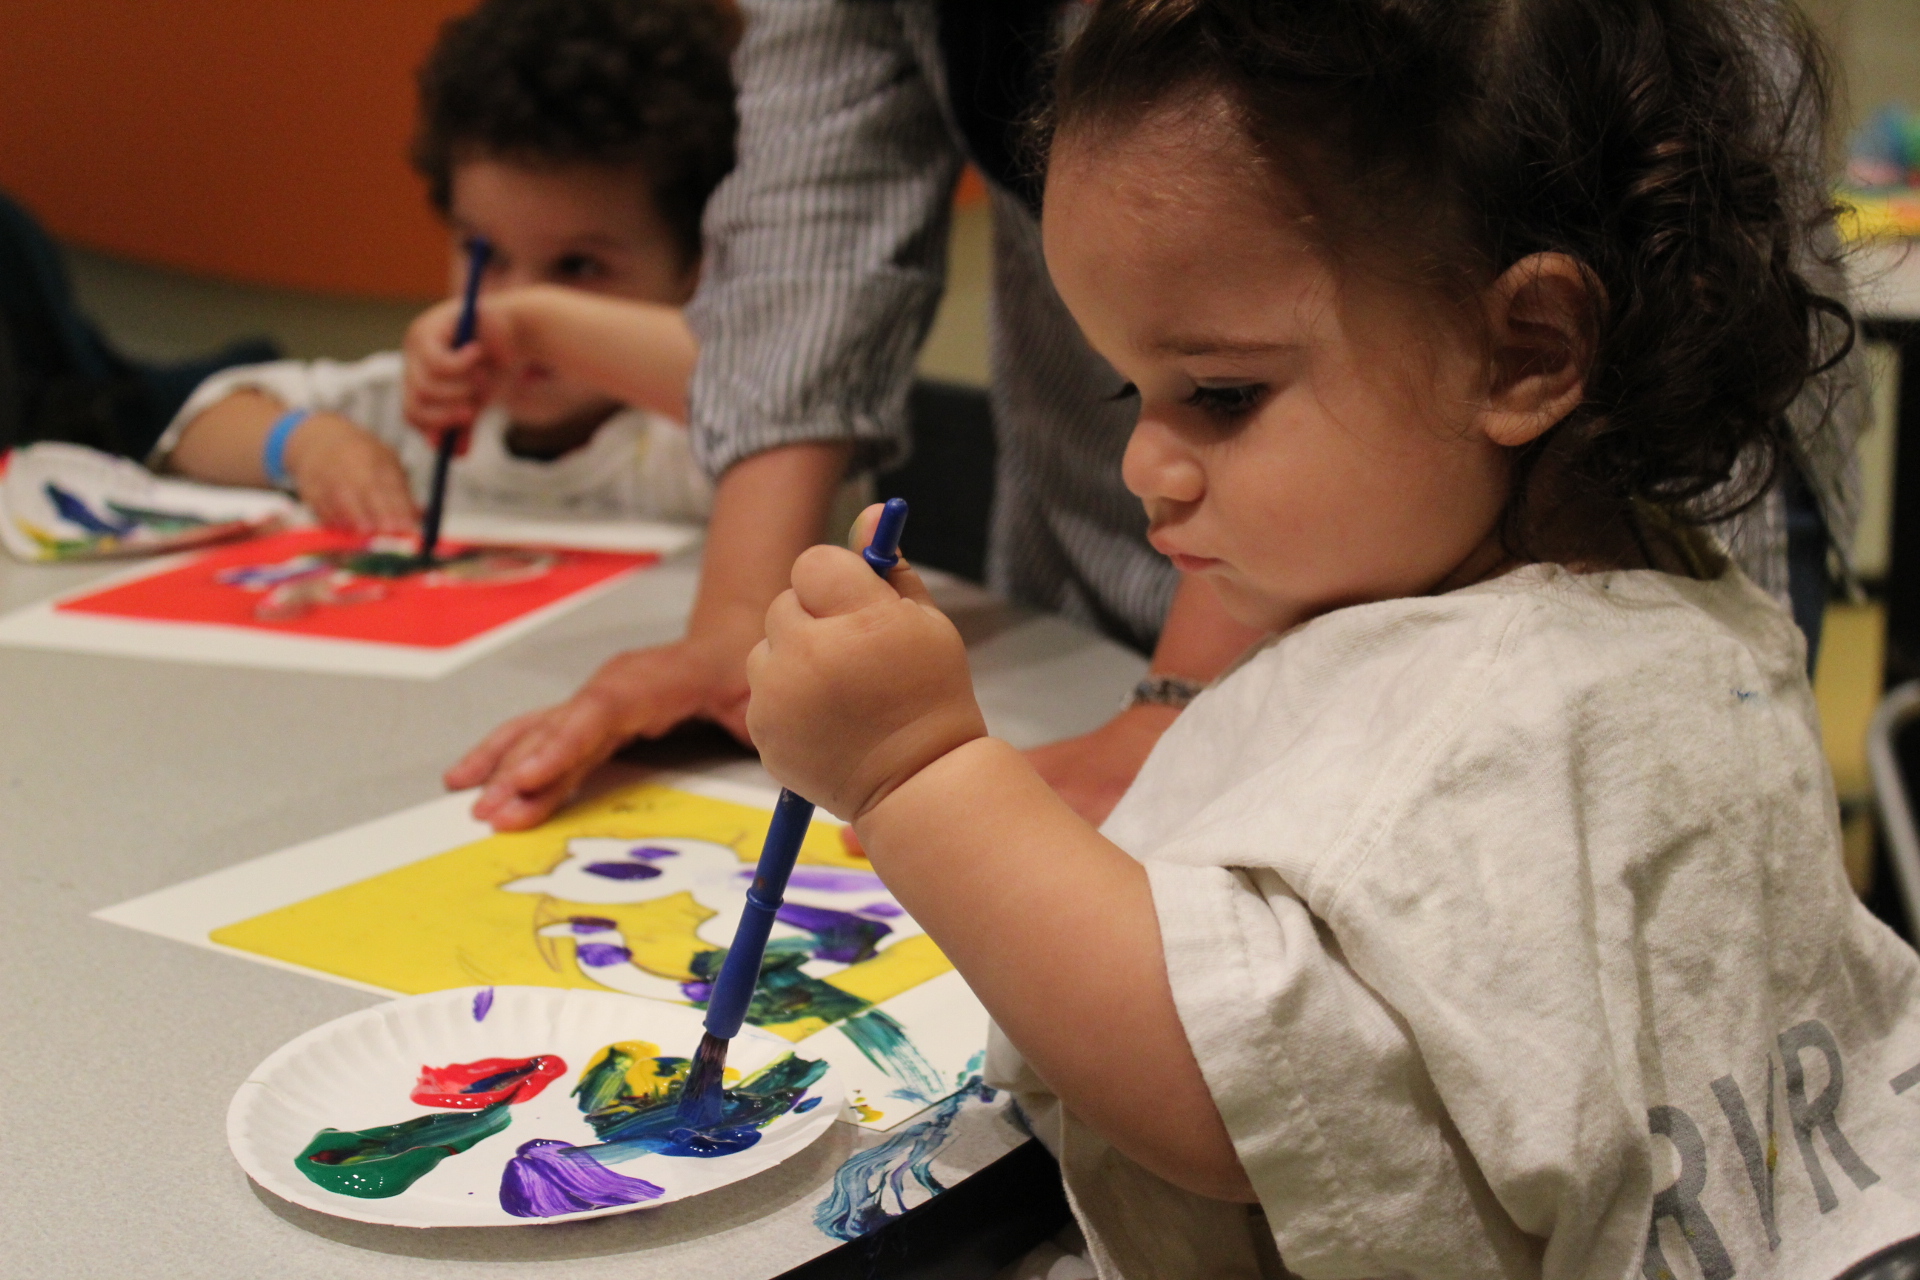 Young child wearing a smock, dips paintbrush into paint on a small paper plate